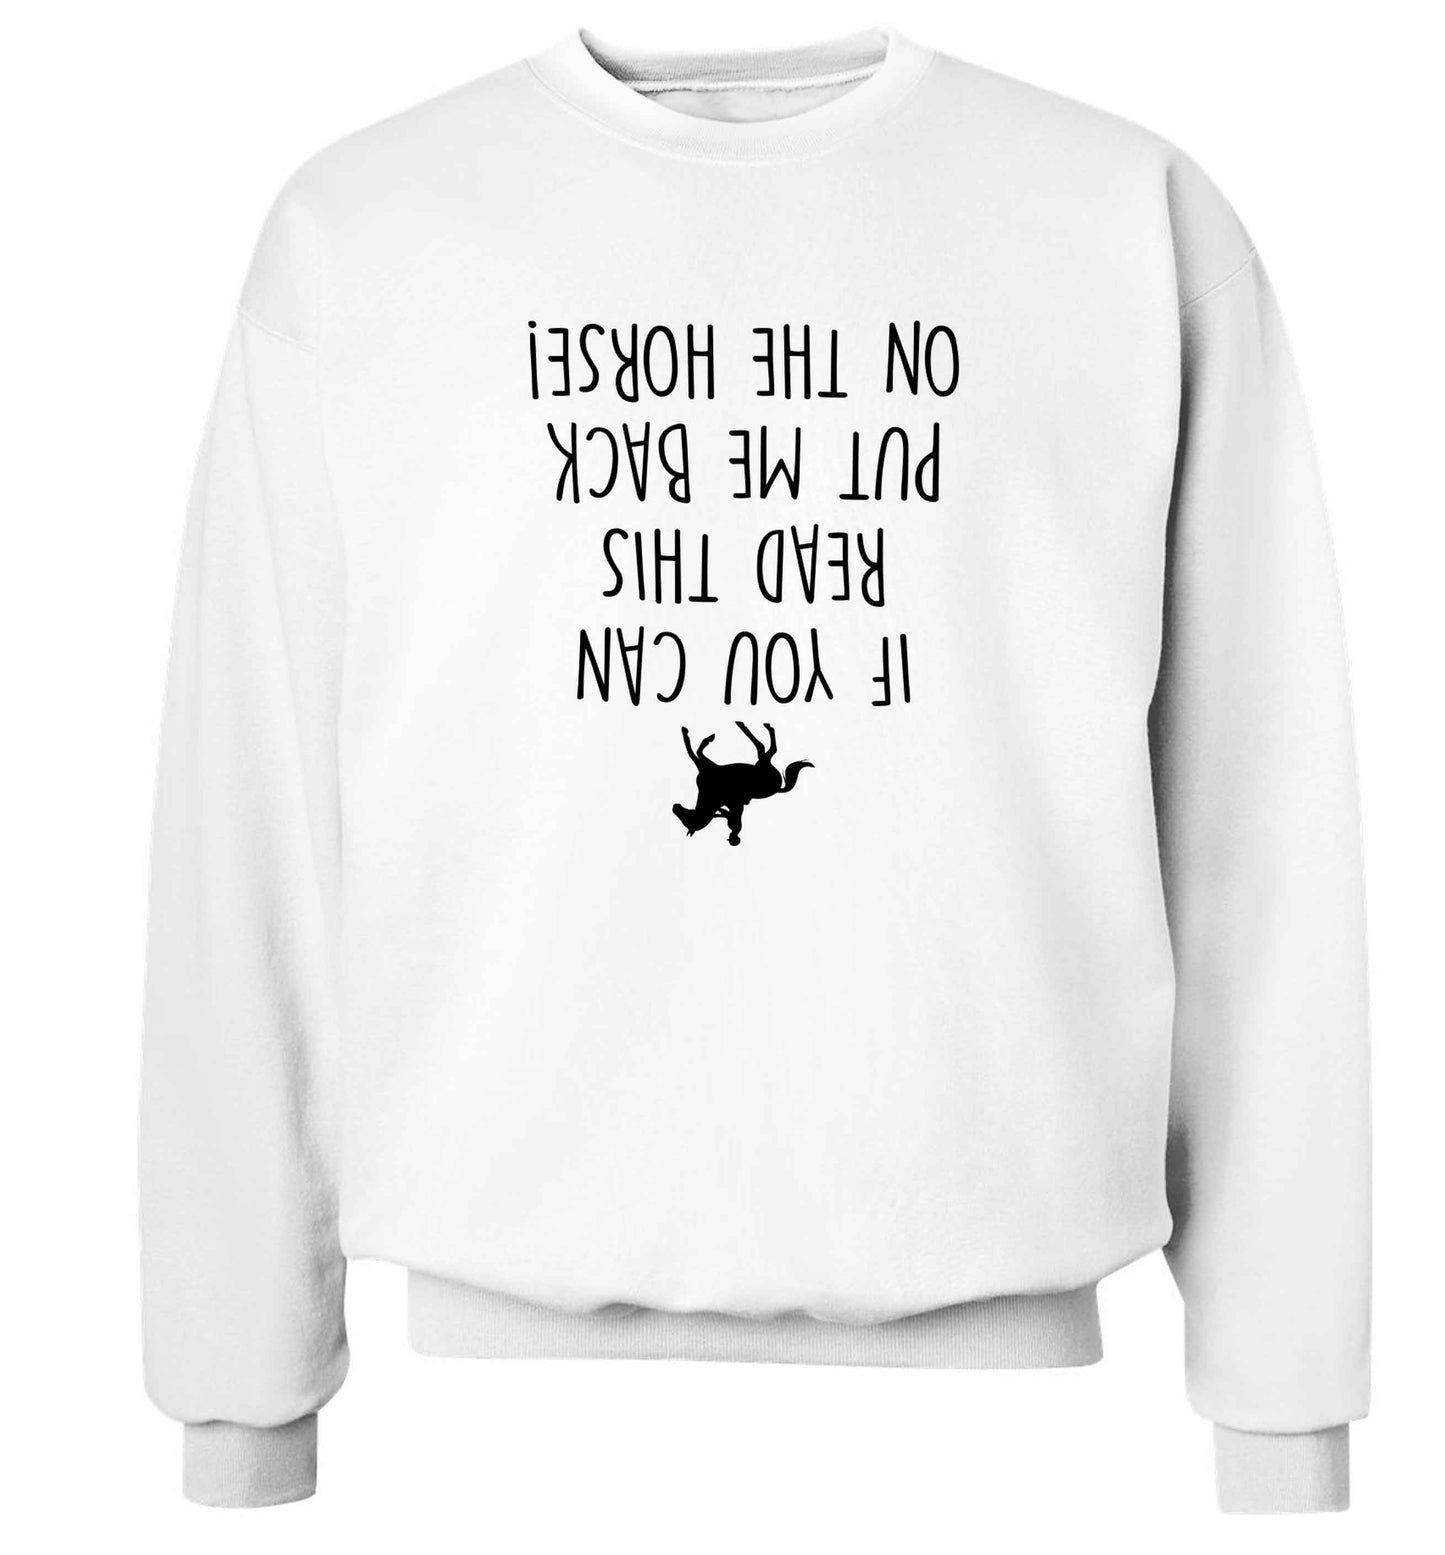 If you can read this put me back on the horse adult's unisex white sweater 2XL